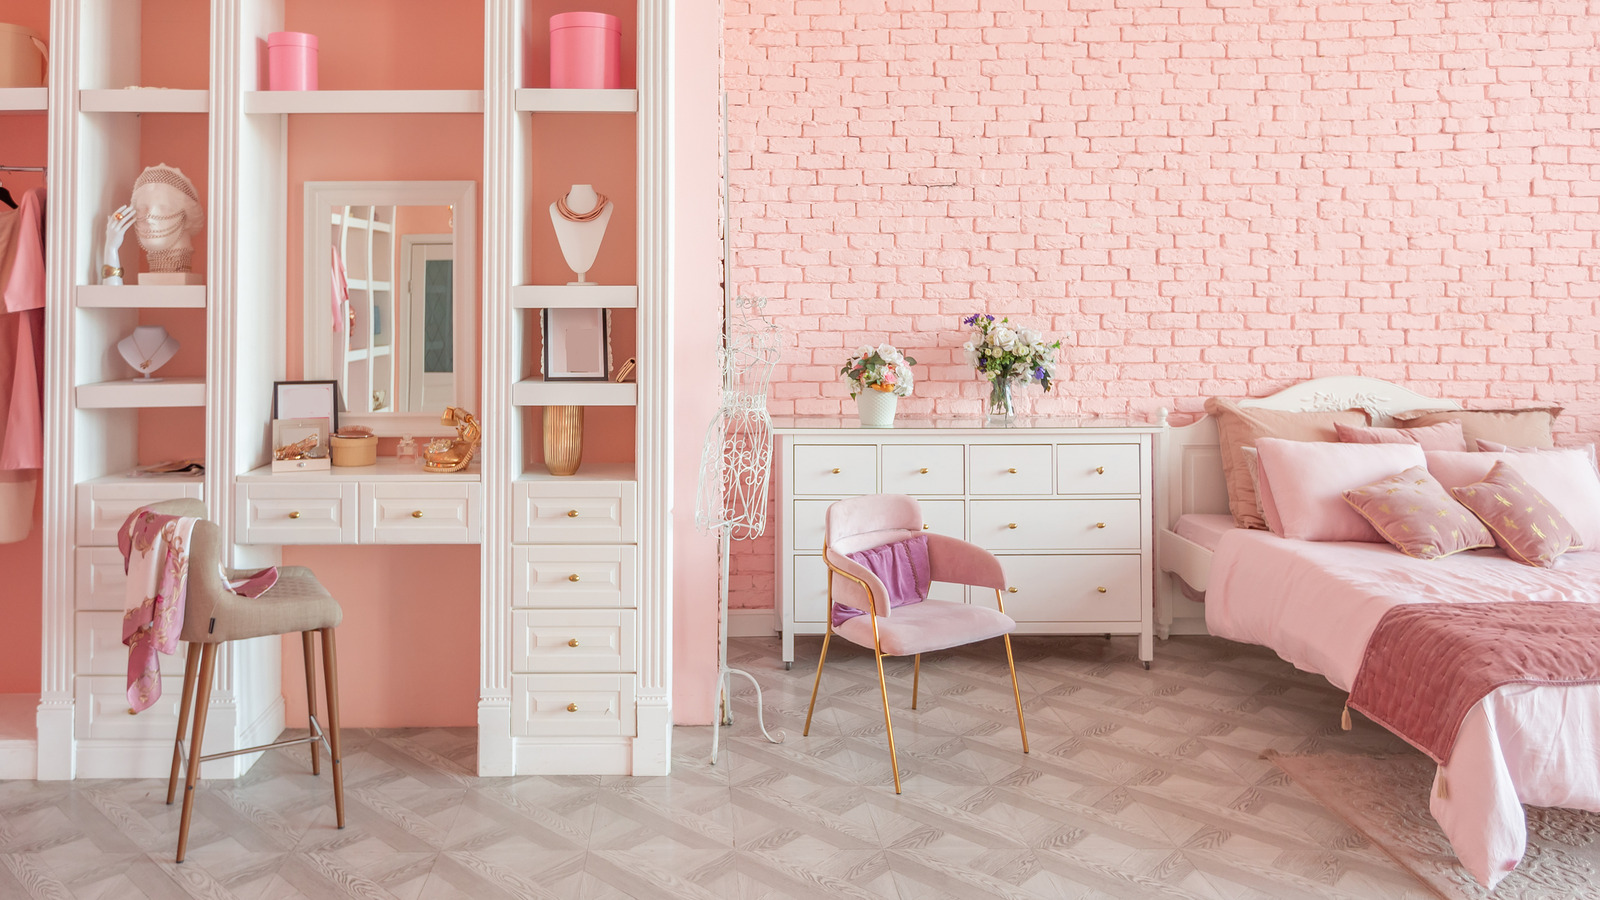 The Coquette Aesthetic Is the Playful Trend Skipping into Homes